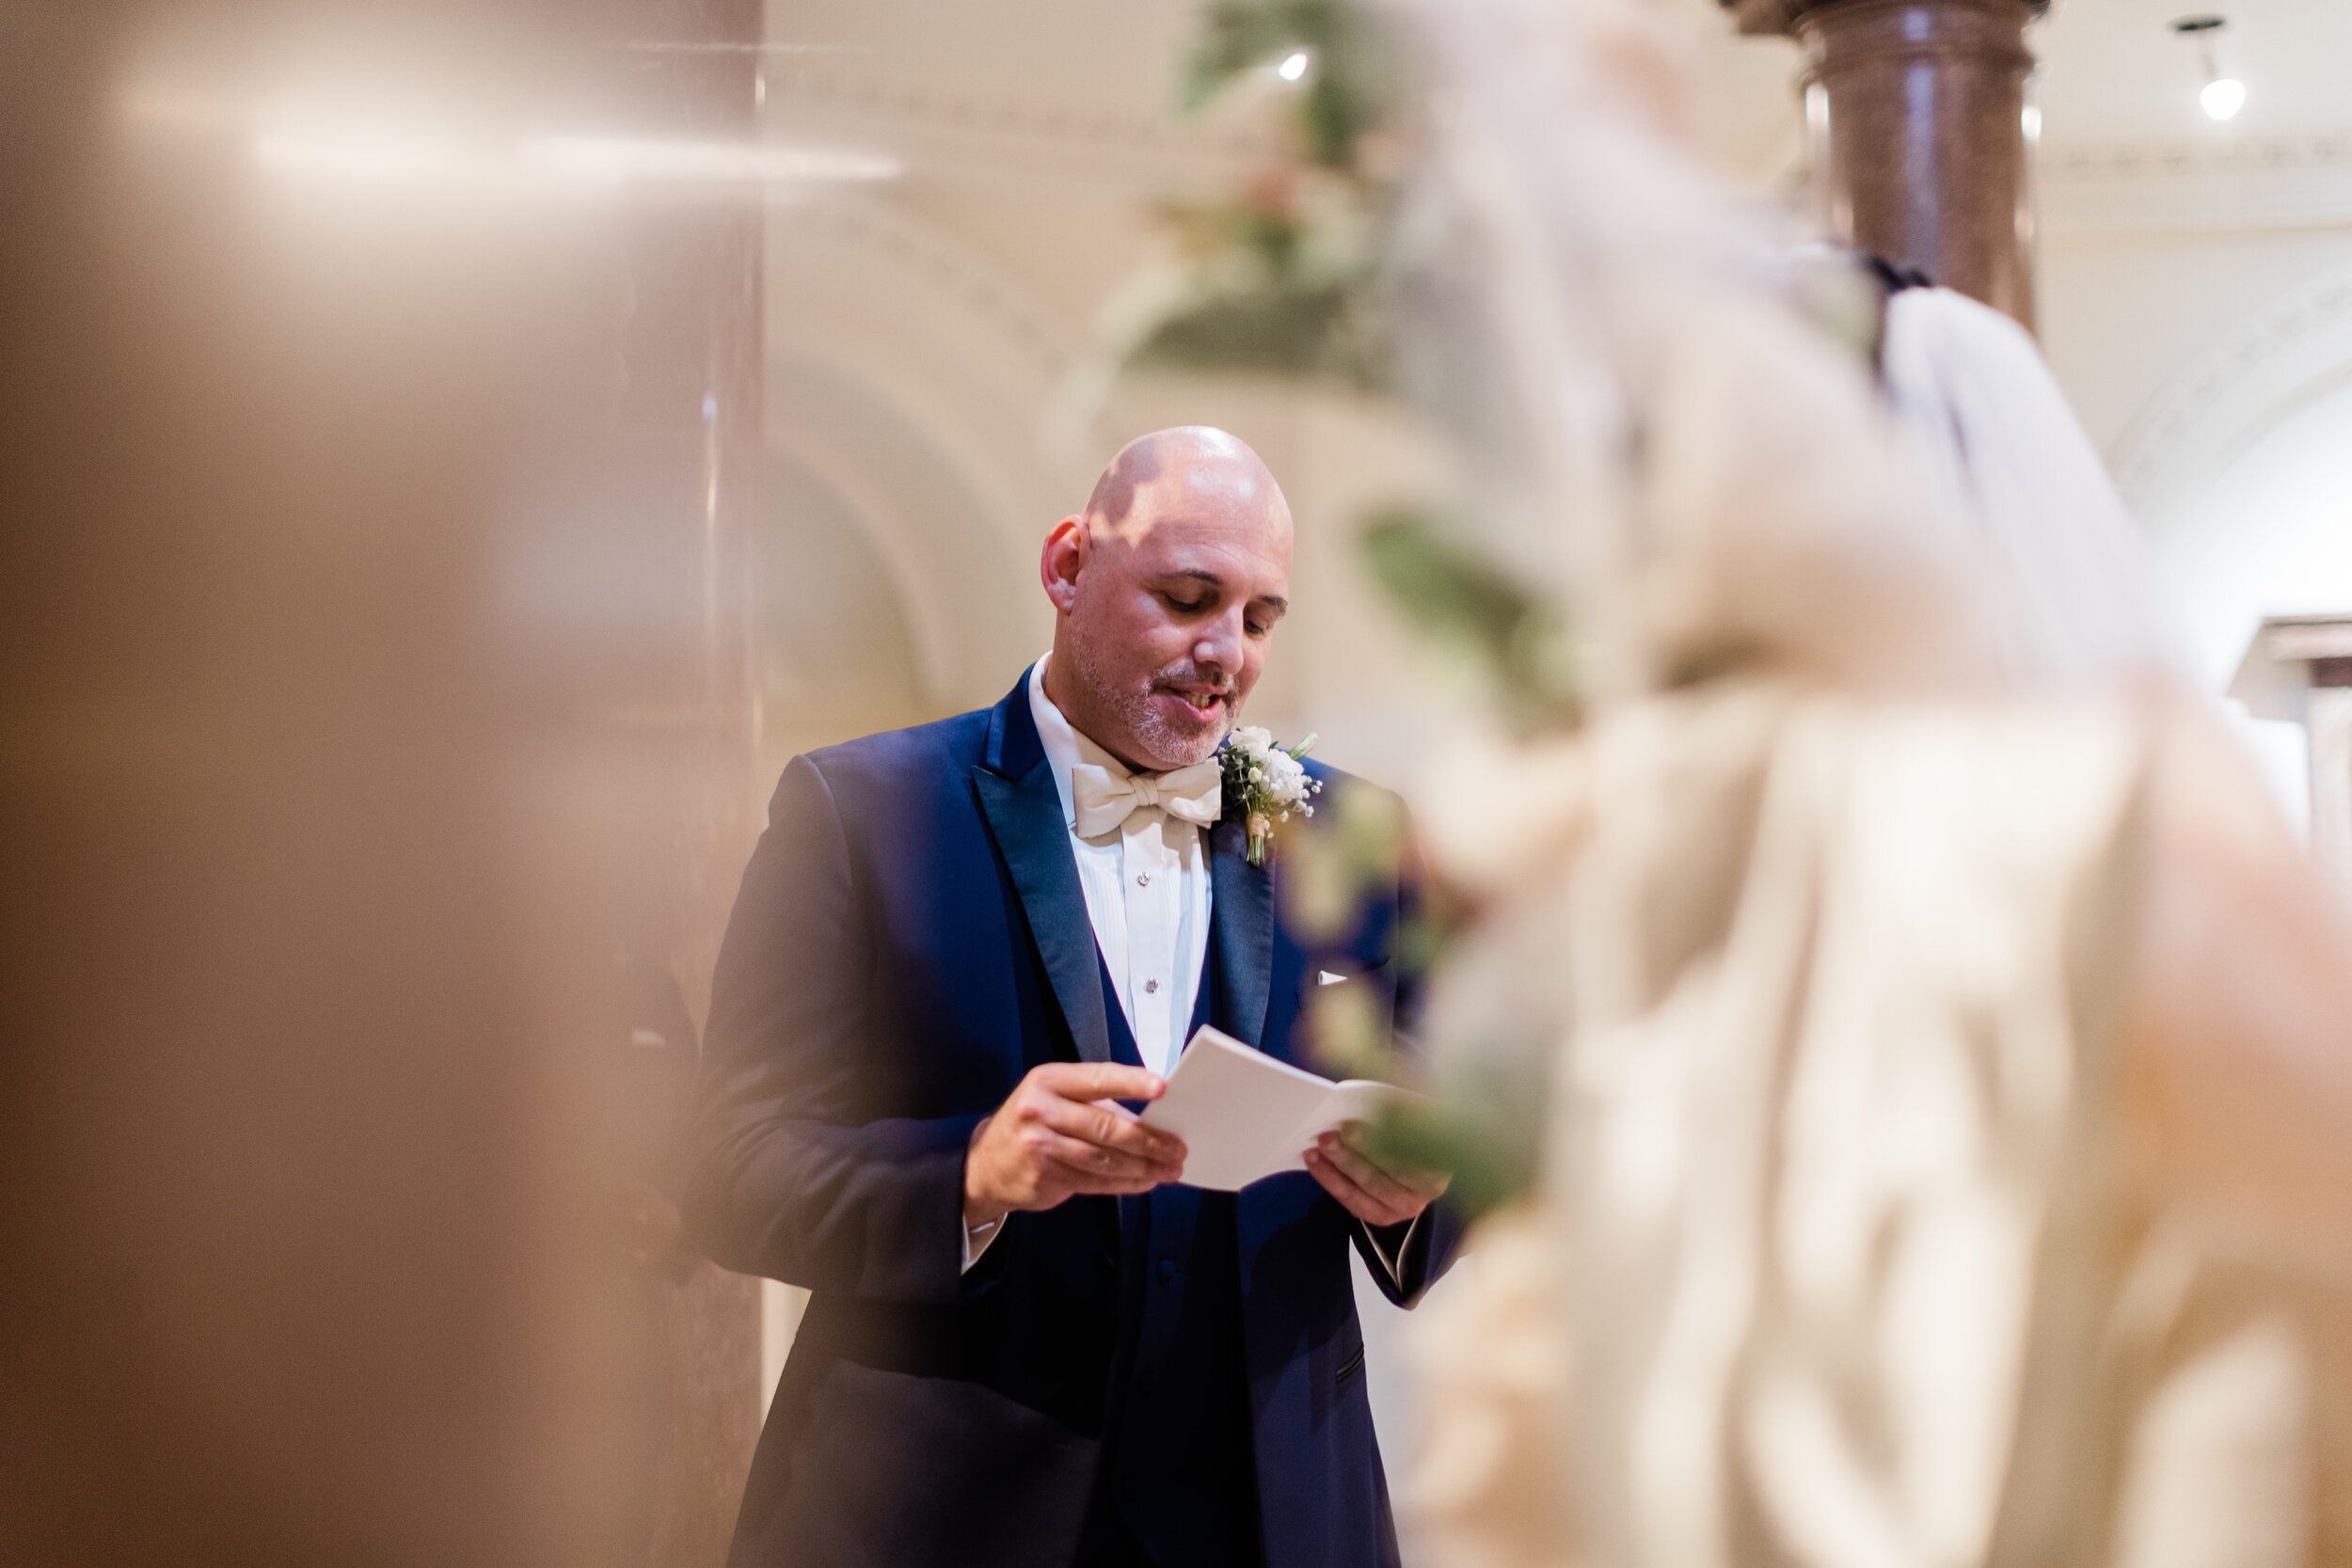 get married in baltimore city hall shot by megapixels media biracial couple wedding photographers maryland-71.jpg